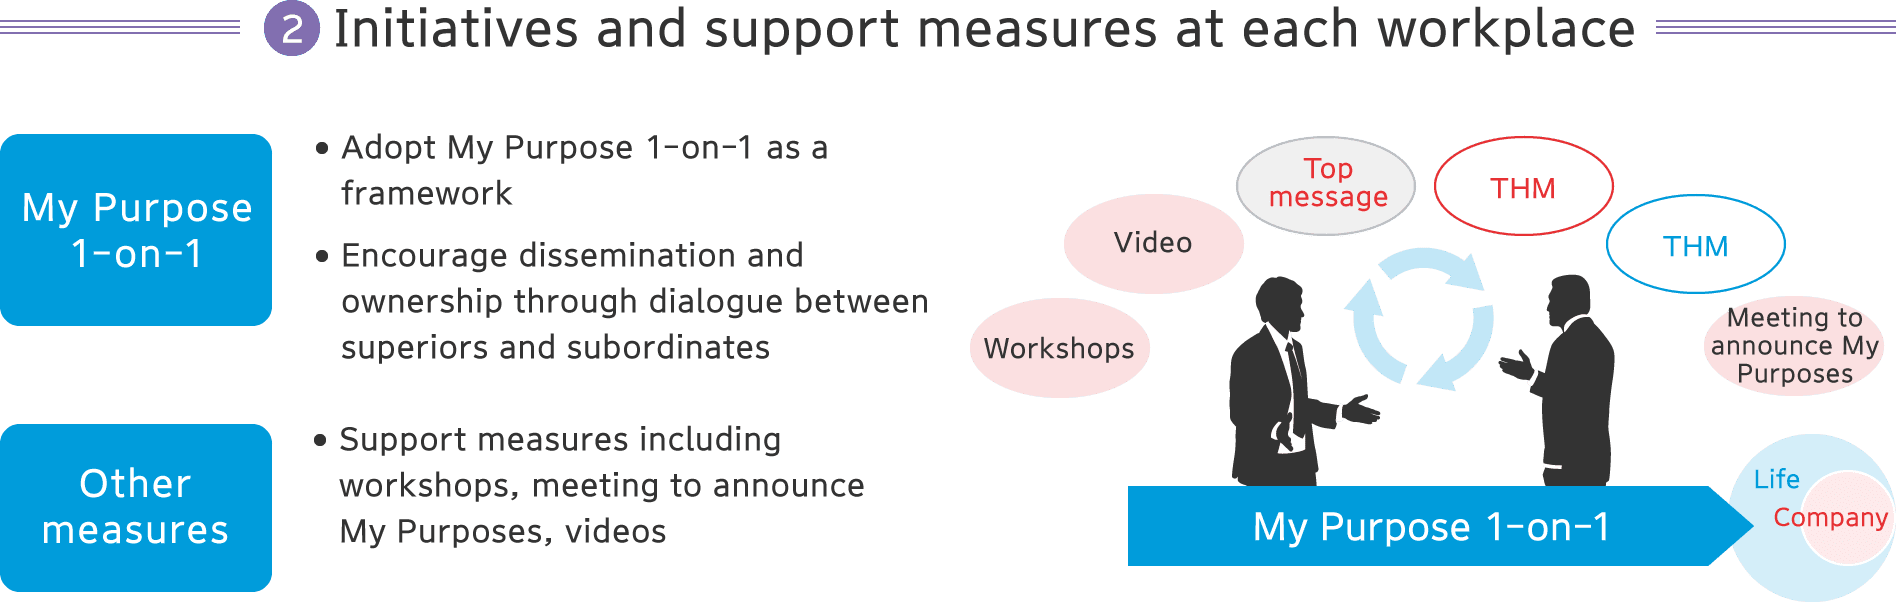 【2】Initiatives and support measures at each workplace